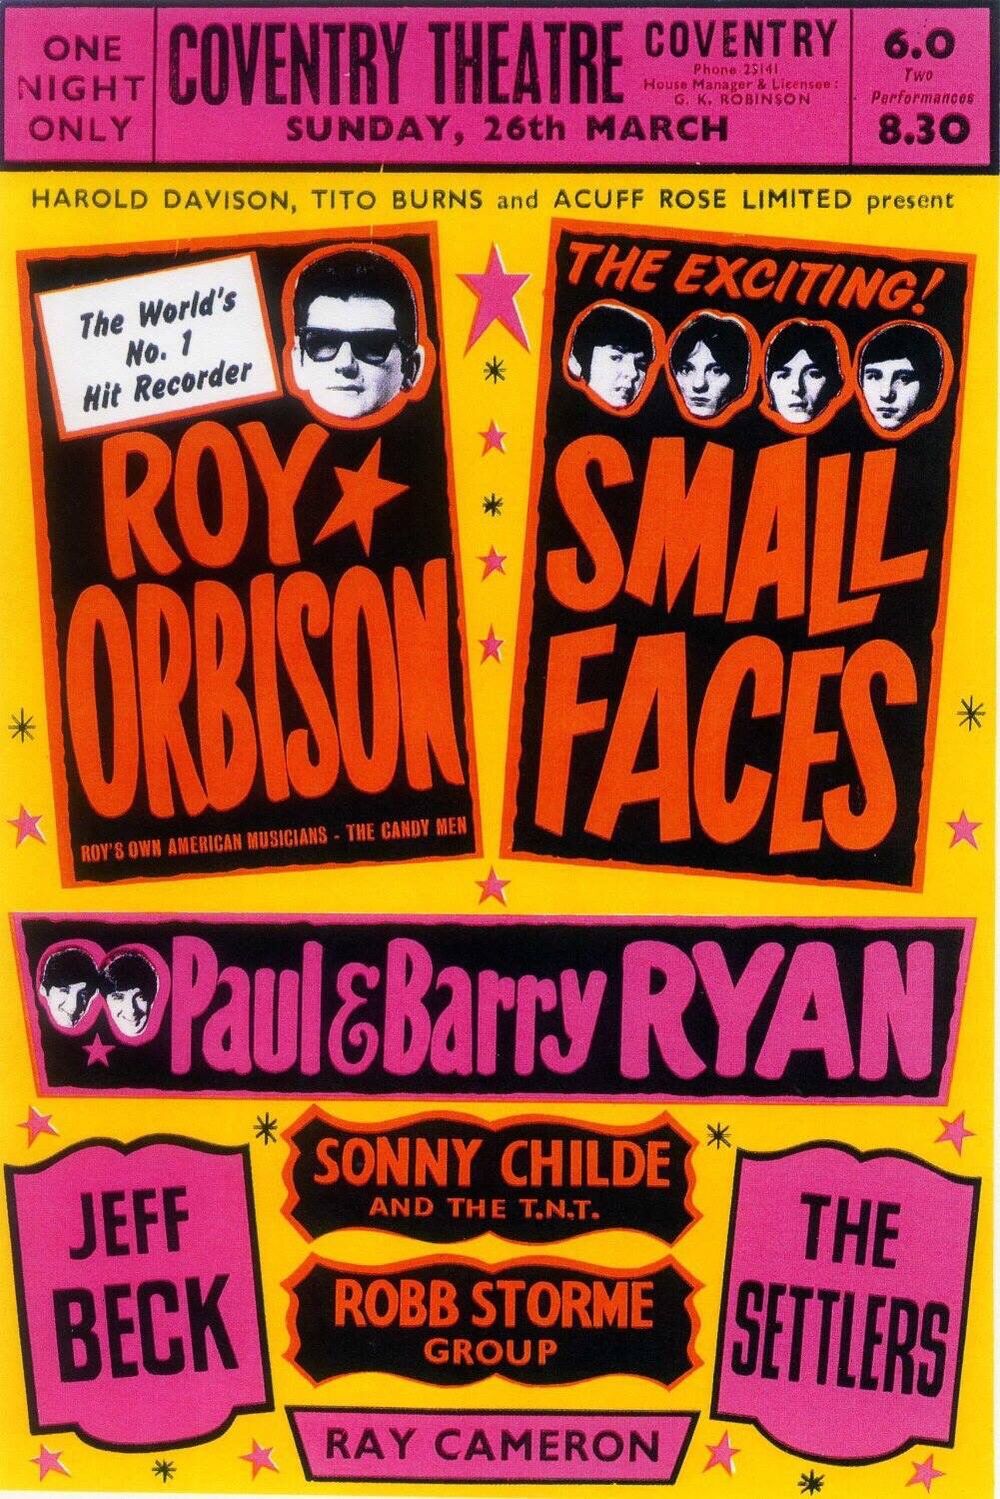 Small Faces - March 26 1967 Coventry Theatre Coventry England